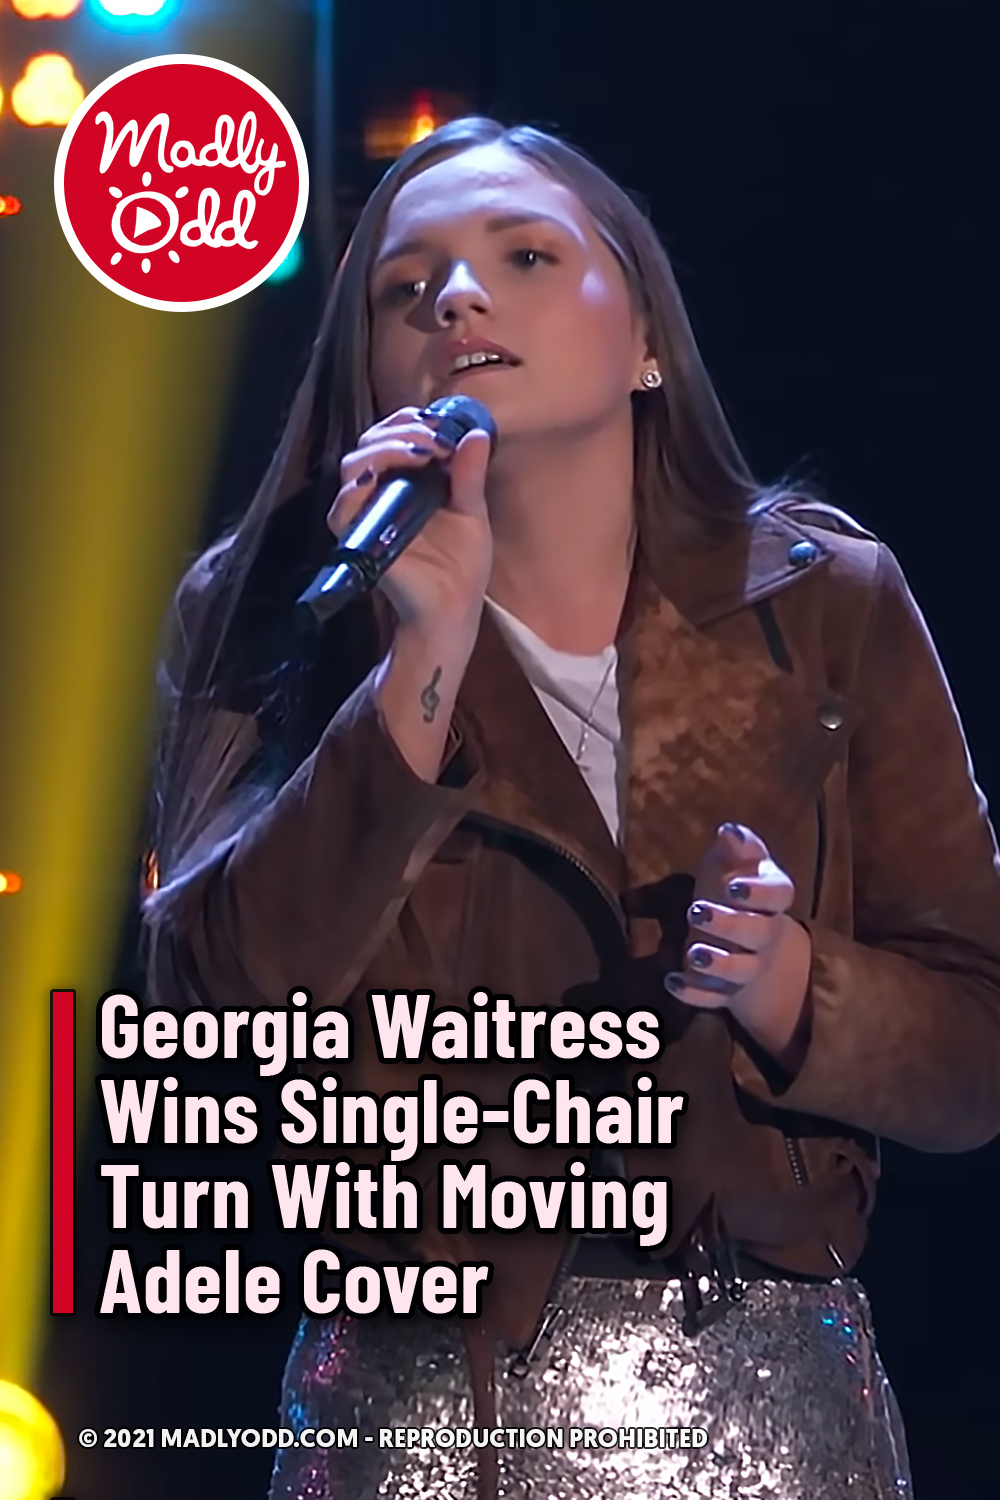 Georgia Waitress Wins Single-Chair Turn With Moving Adele Cover